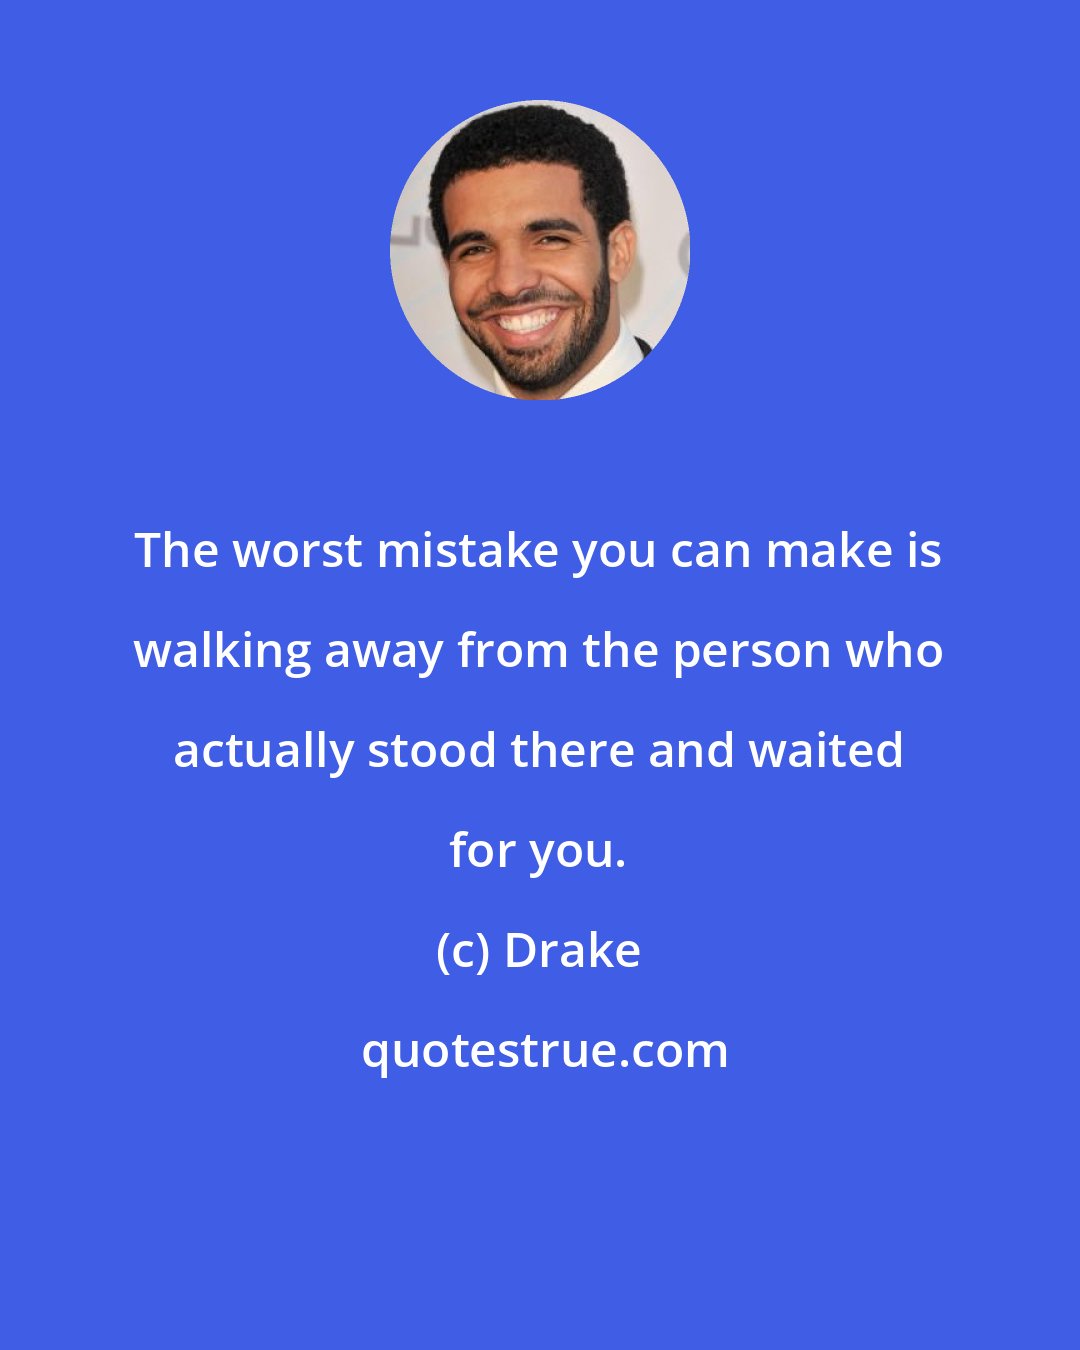 Drake: The worst mistake you can make is walking away from the person who actually stood there and waited for you.